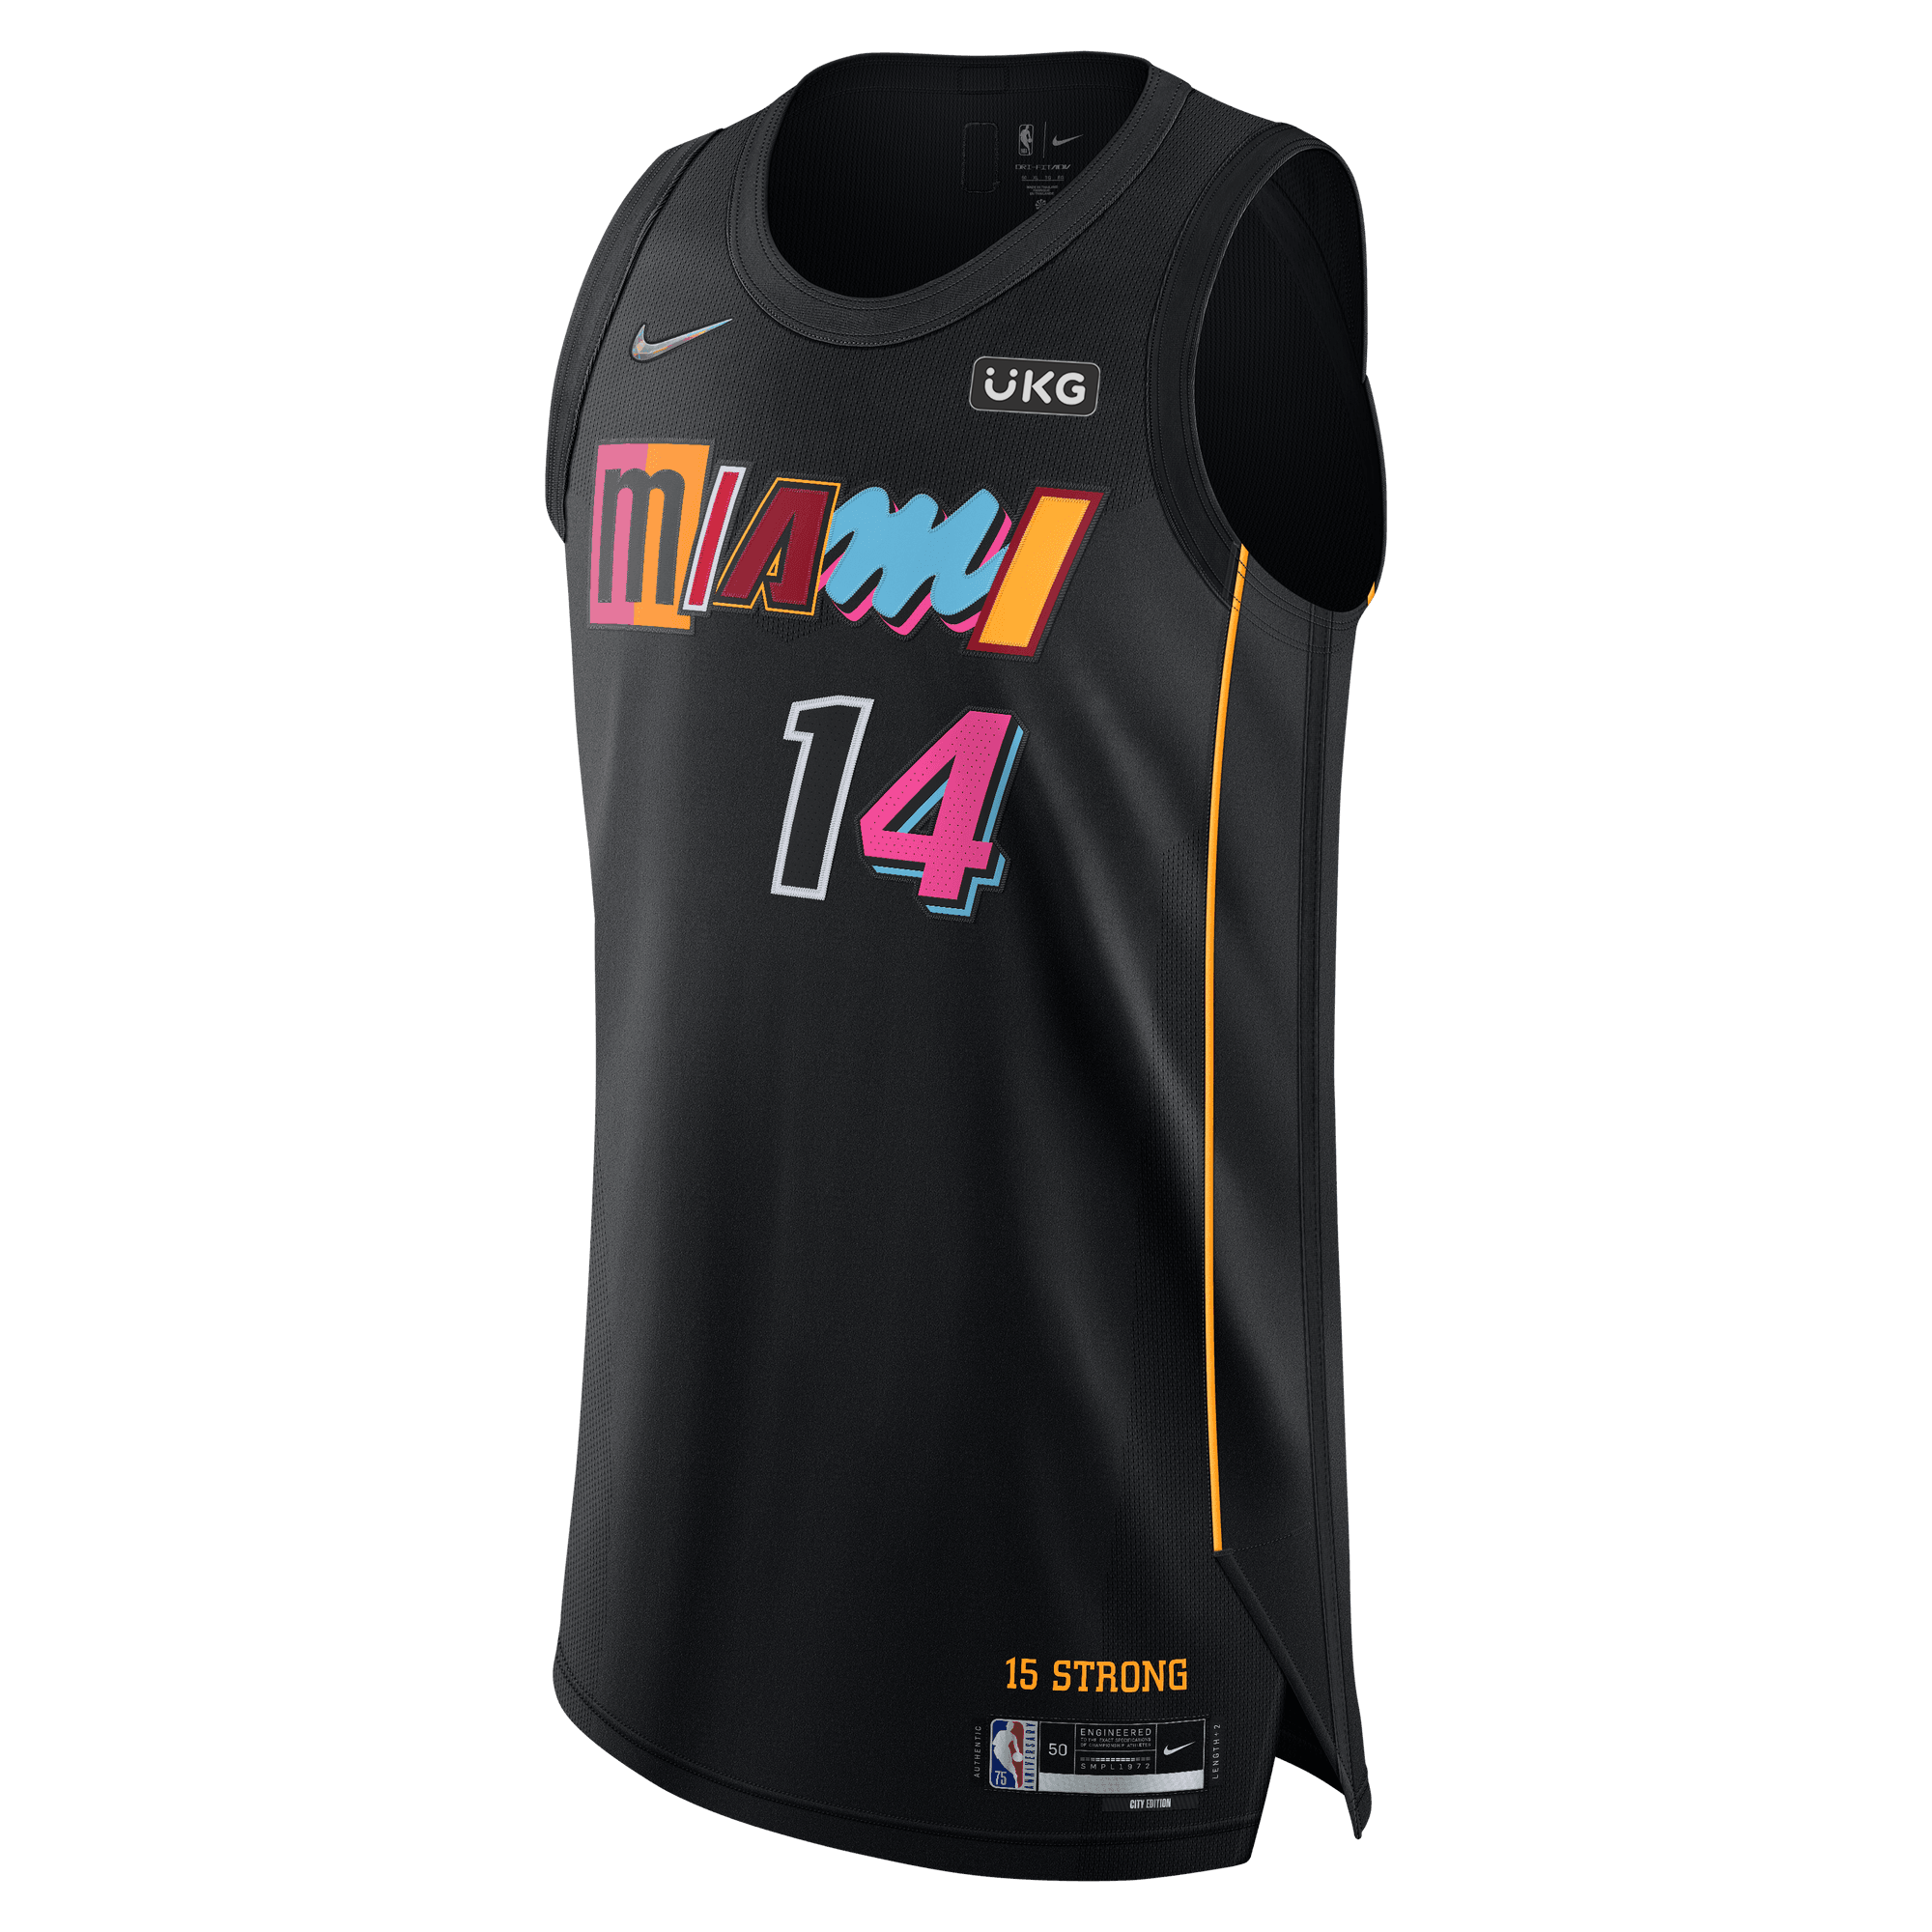 The Best Miami Heat Jerseys, From Vice Versa to Heat Strong